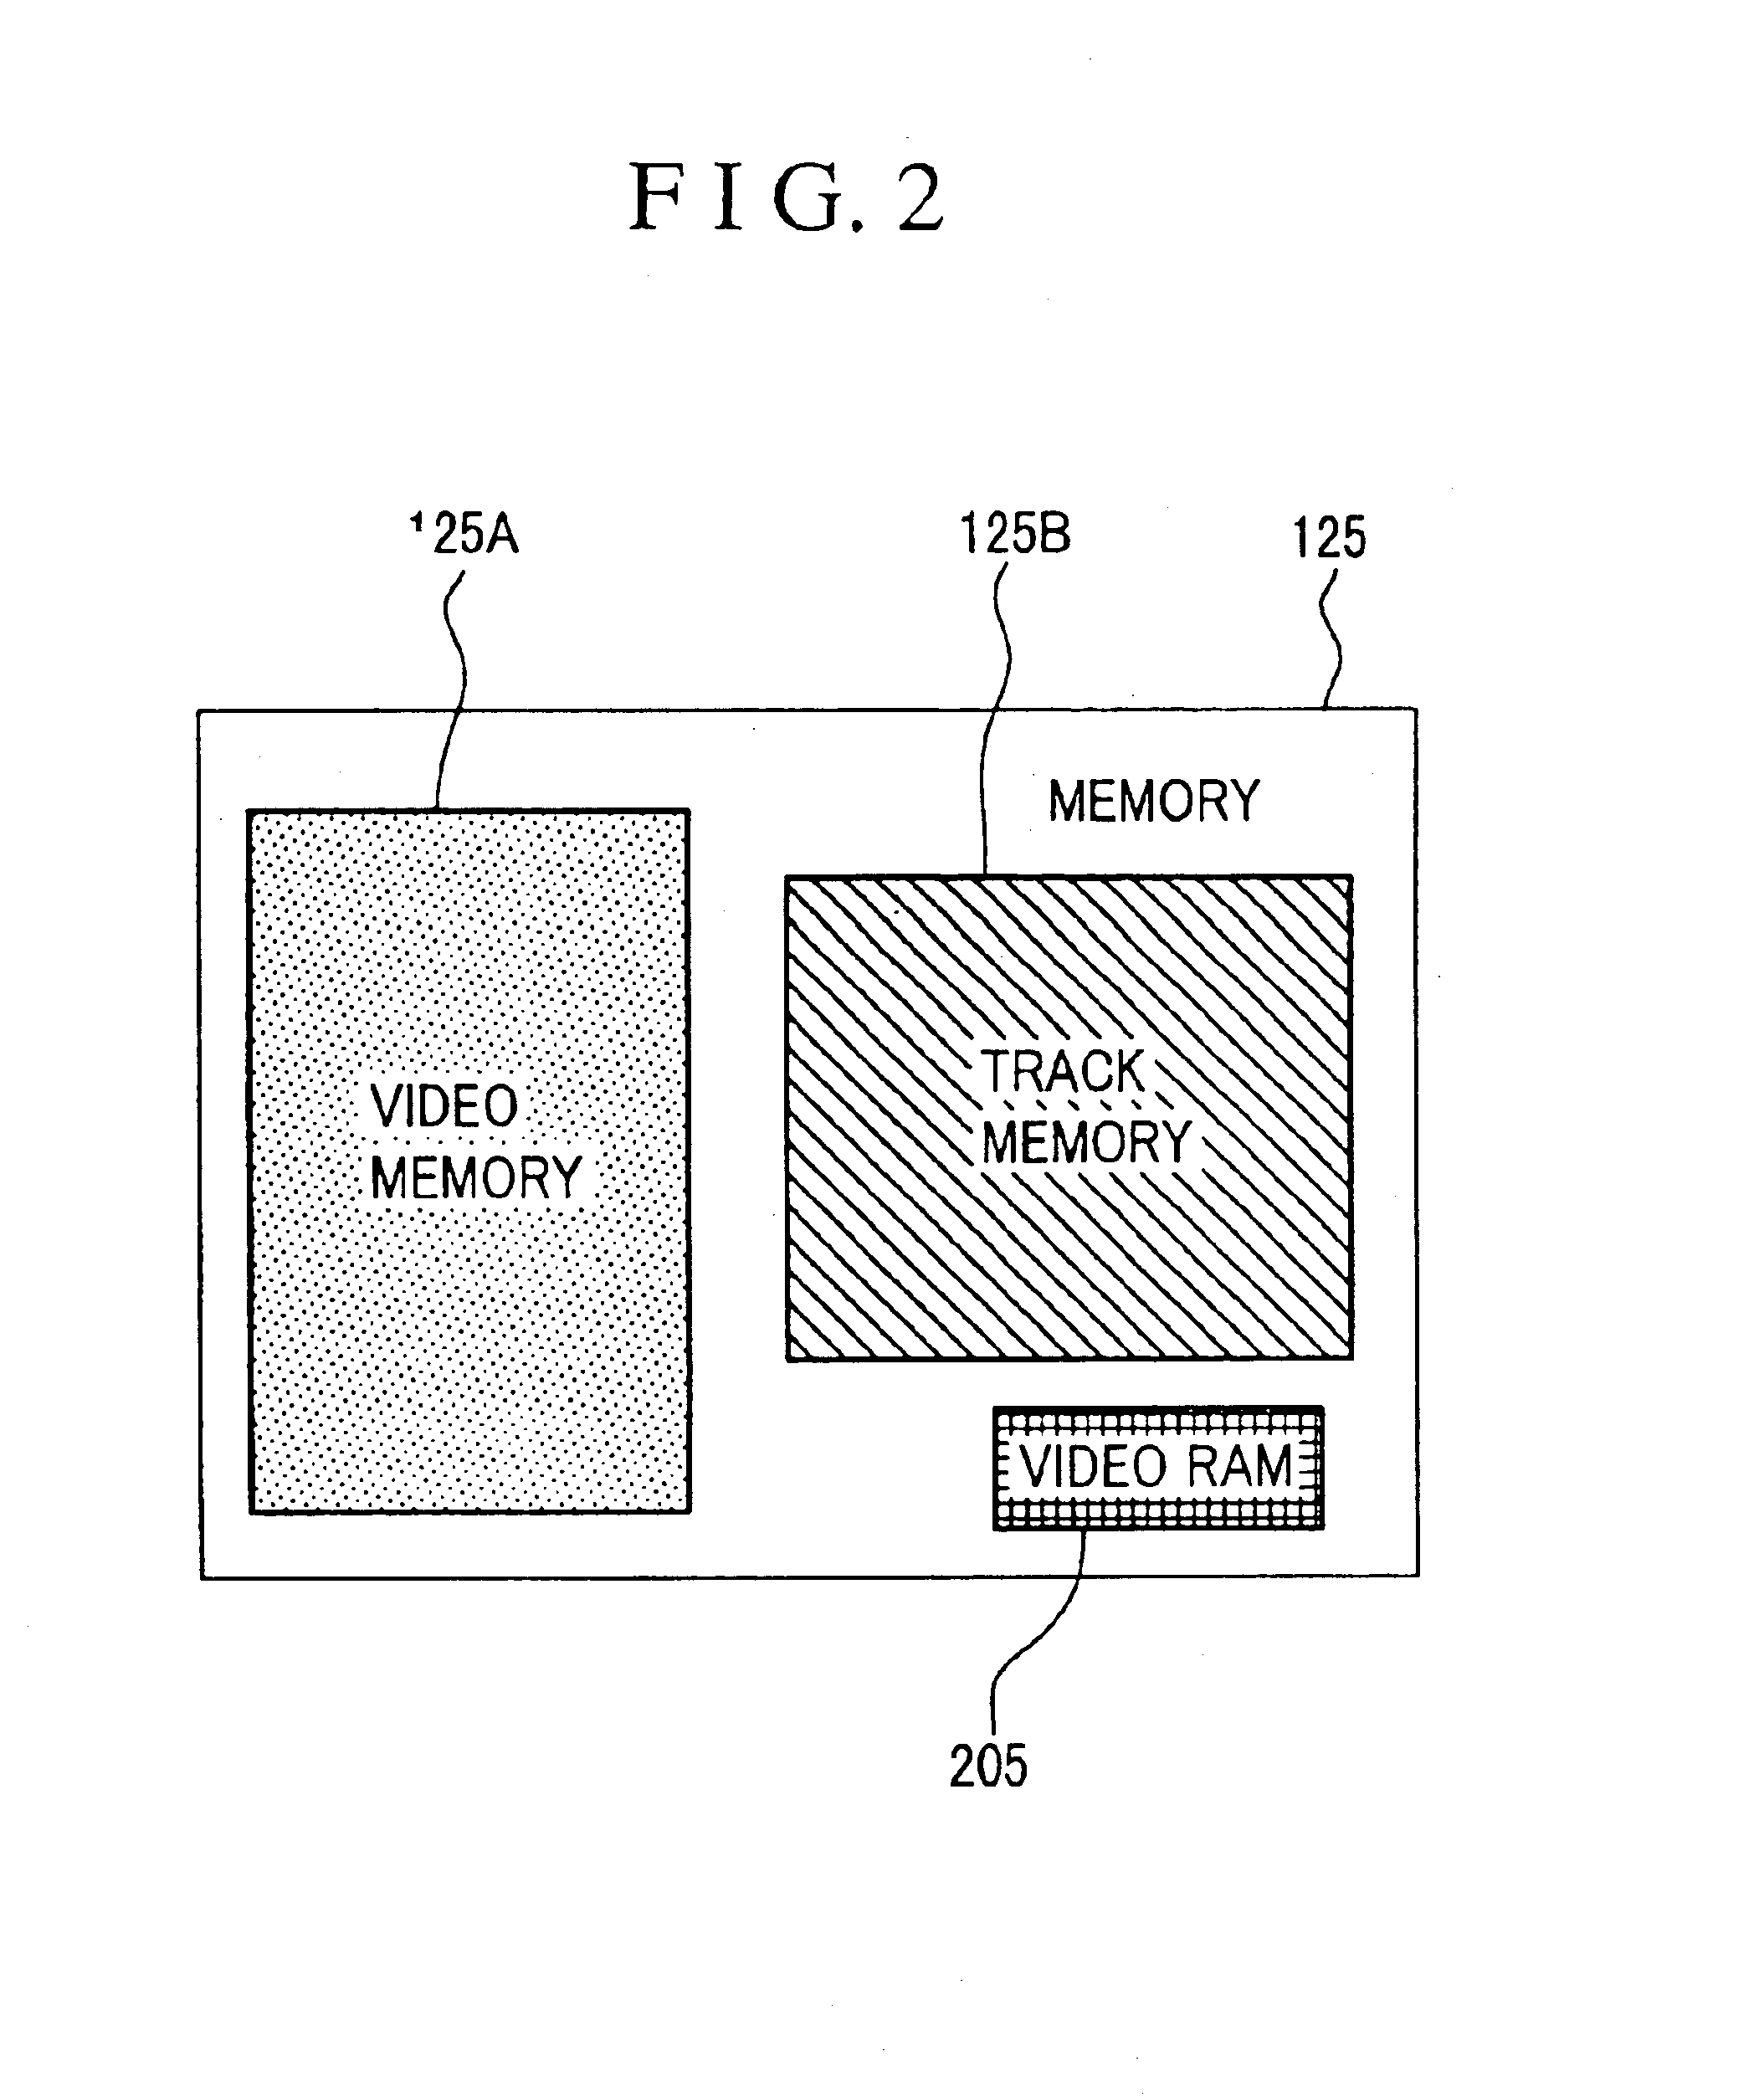 Signal processing device for processing video signal information by using memory